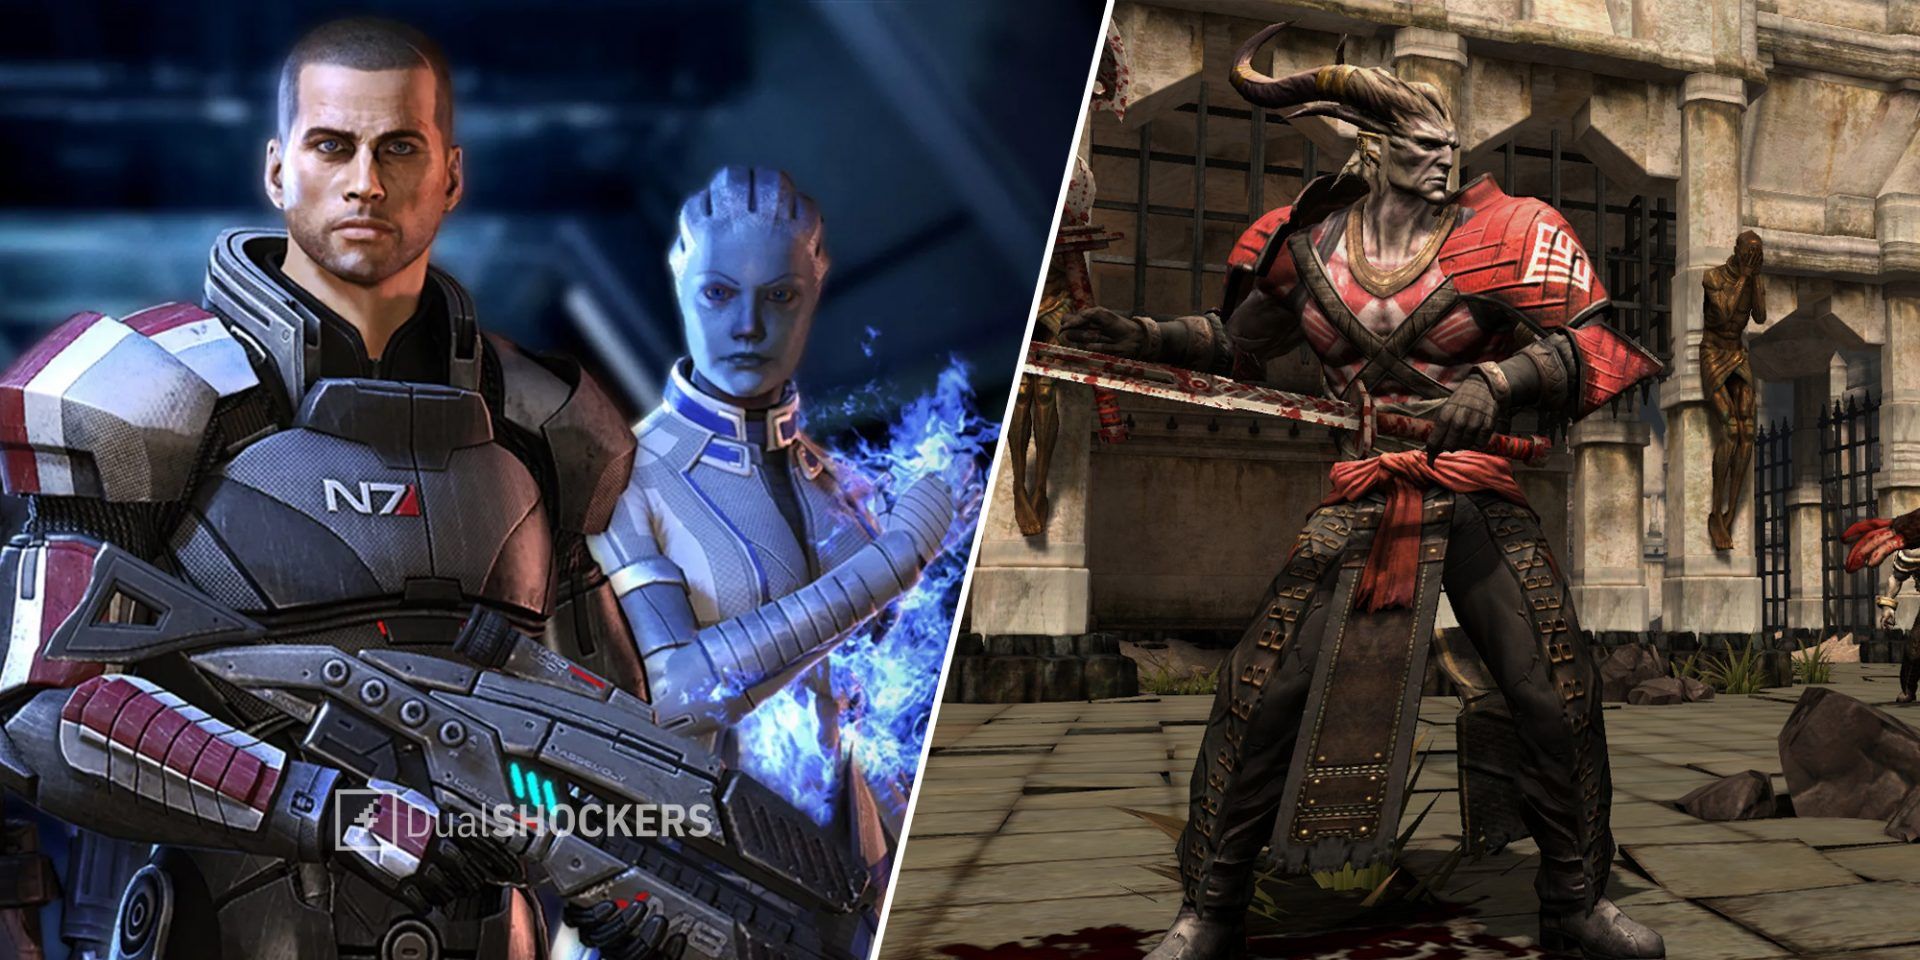 Most Dragon Age and Mass Effect DLC is now free on PC through